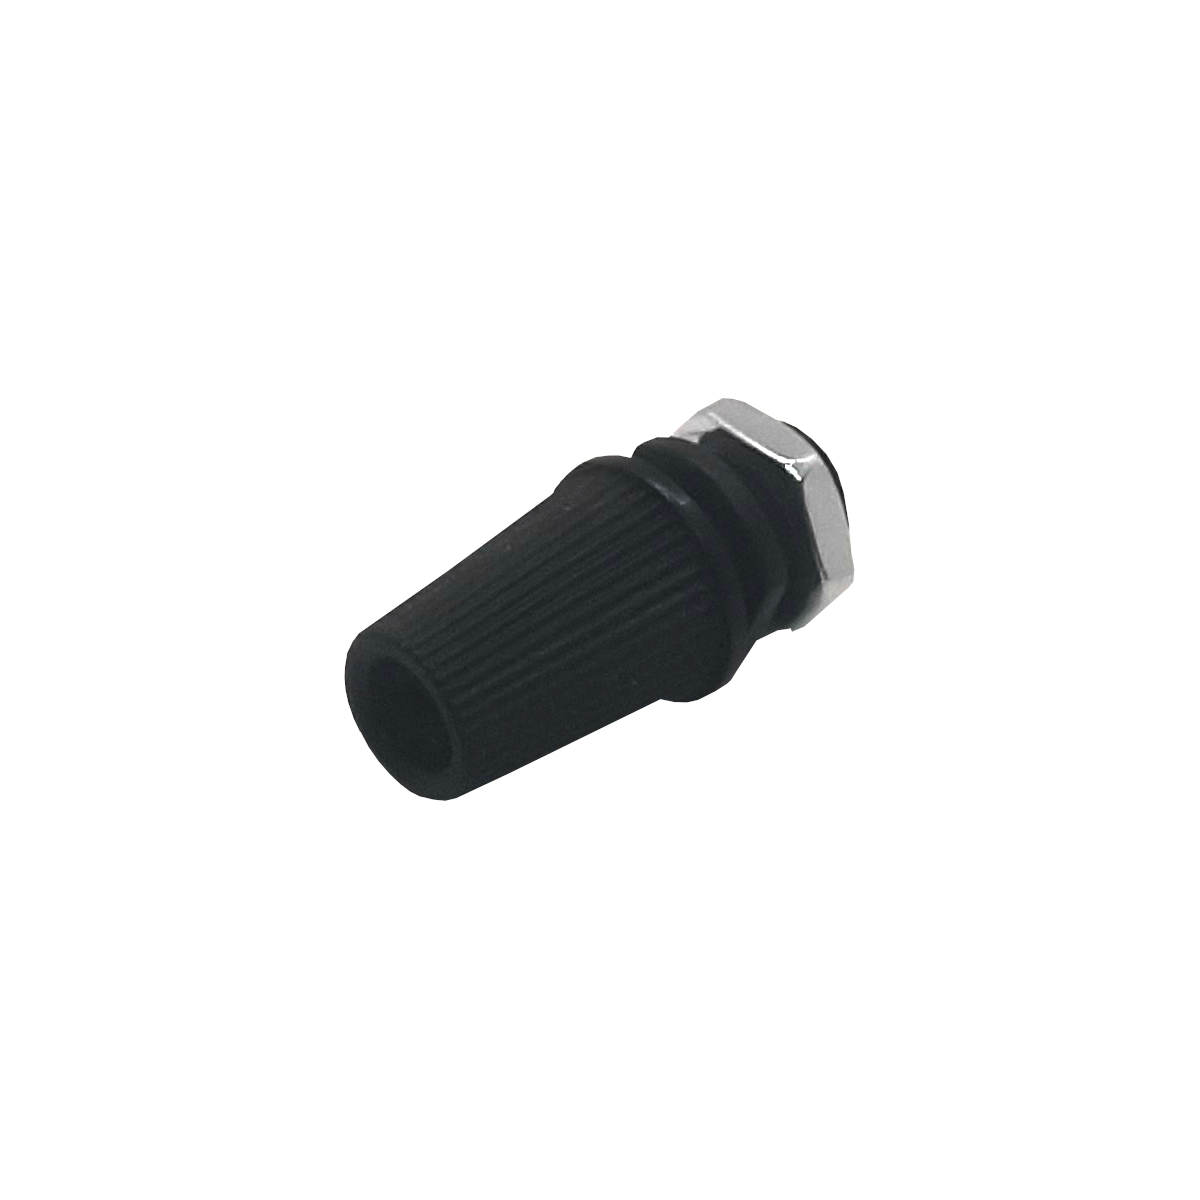 Product image of SG010 Black Plastic Cord Grip